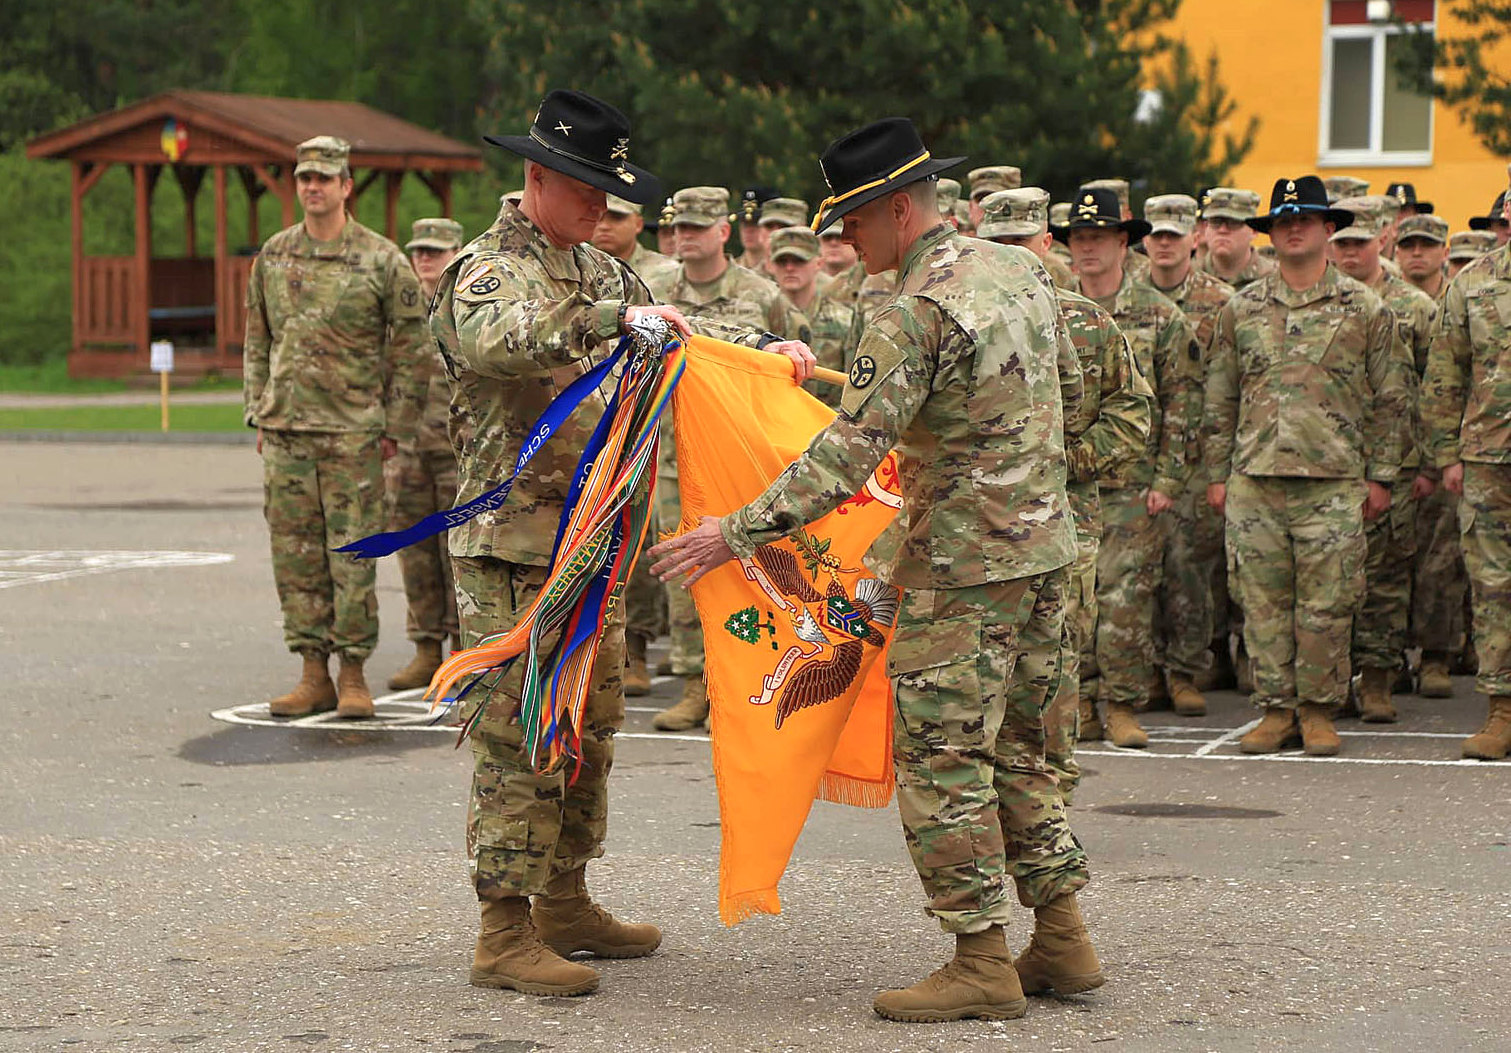 U.S. Army personnel case their unit colors during the transfer of authority ceremony of the JMTG-U training mission at the Yavoriv training range on May 2, 2019.